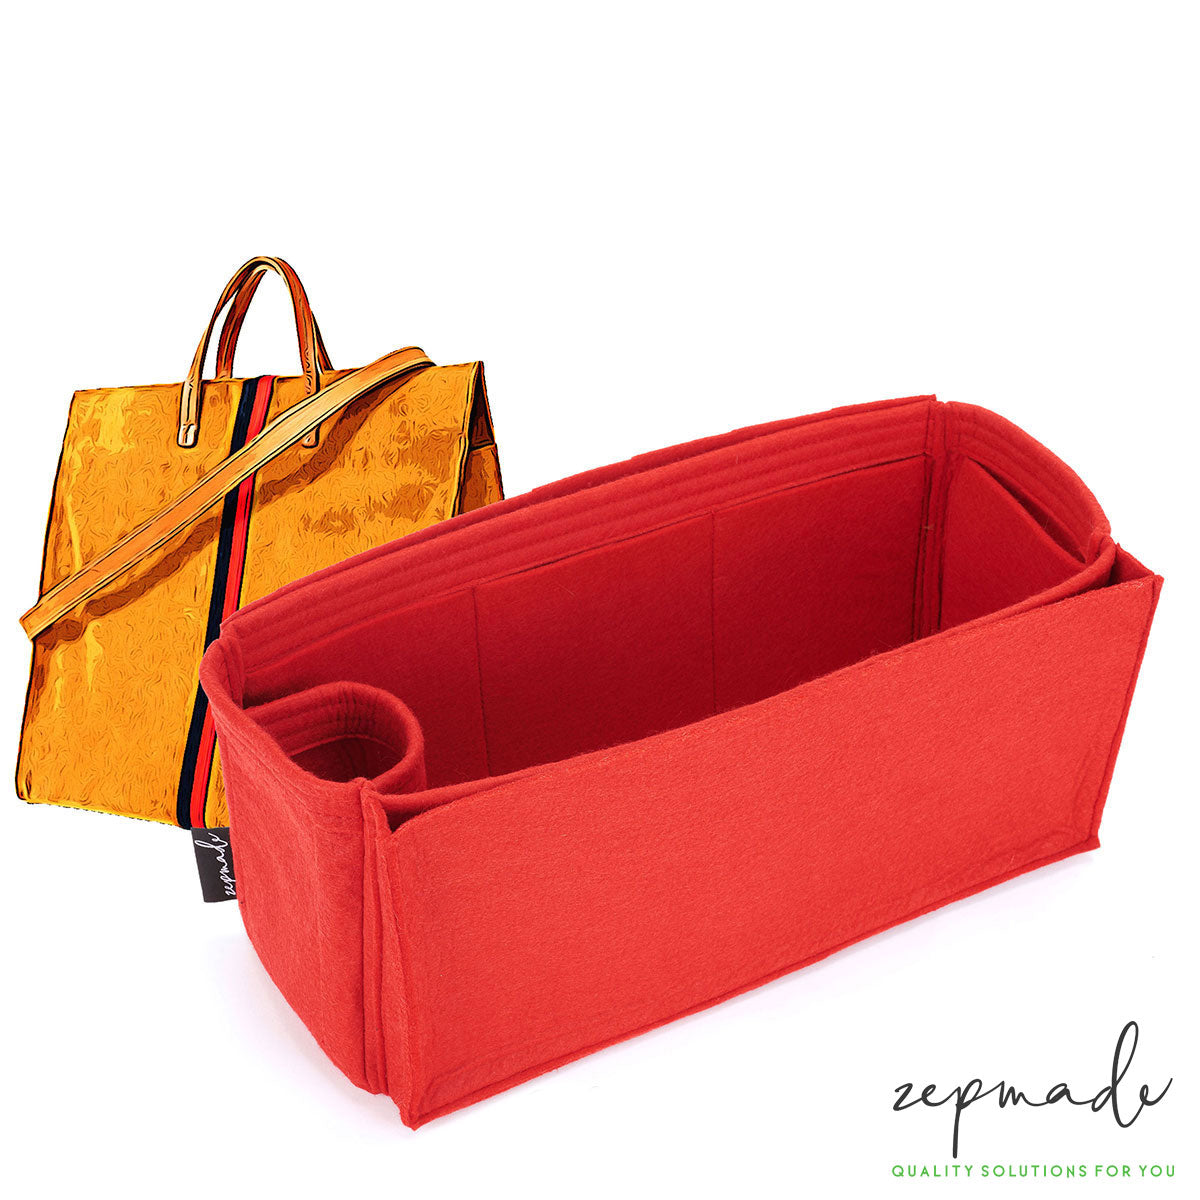 Clare V. Simple Tote Organizer Insert, Bag Organizer with Laptop